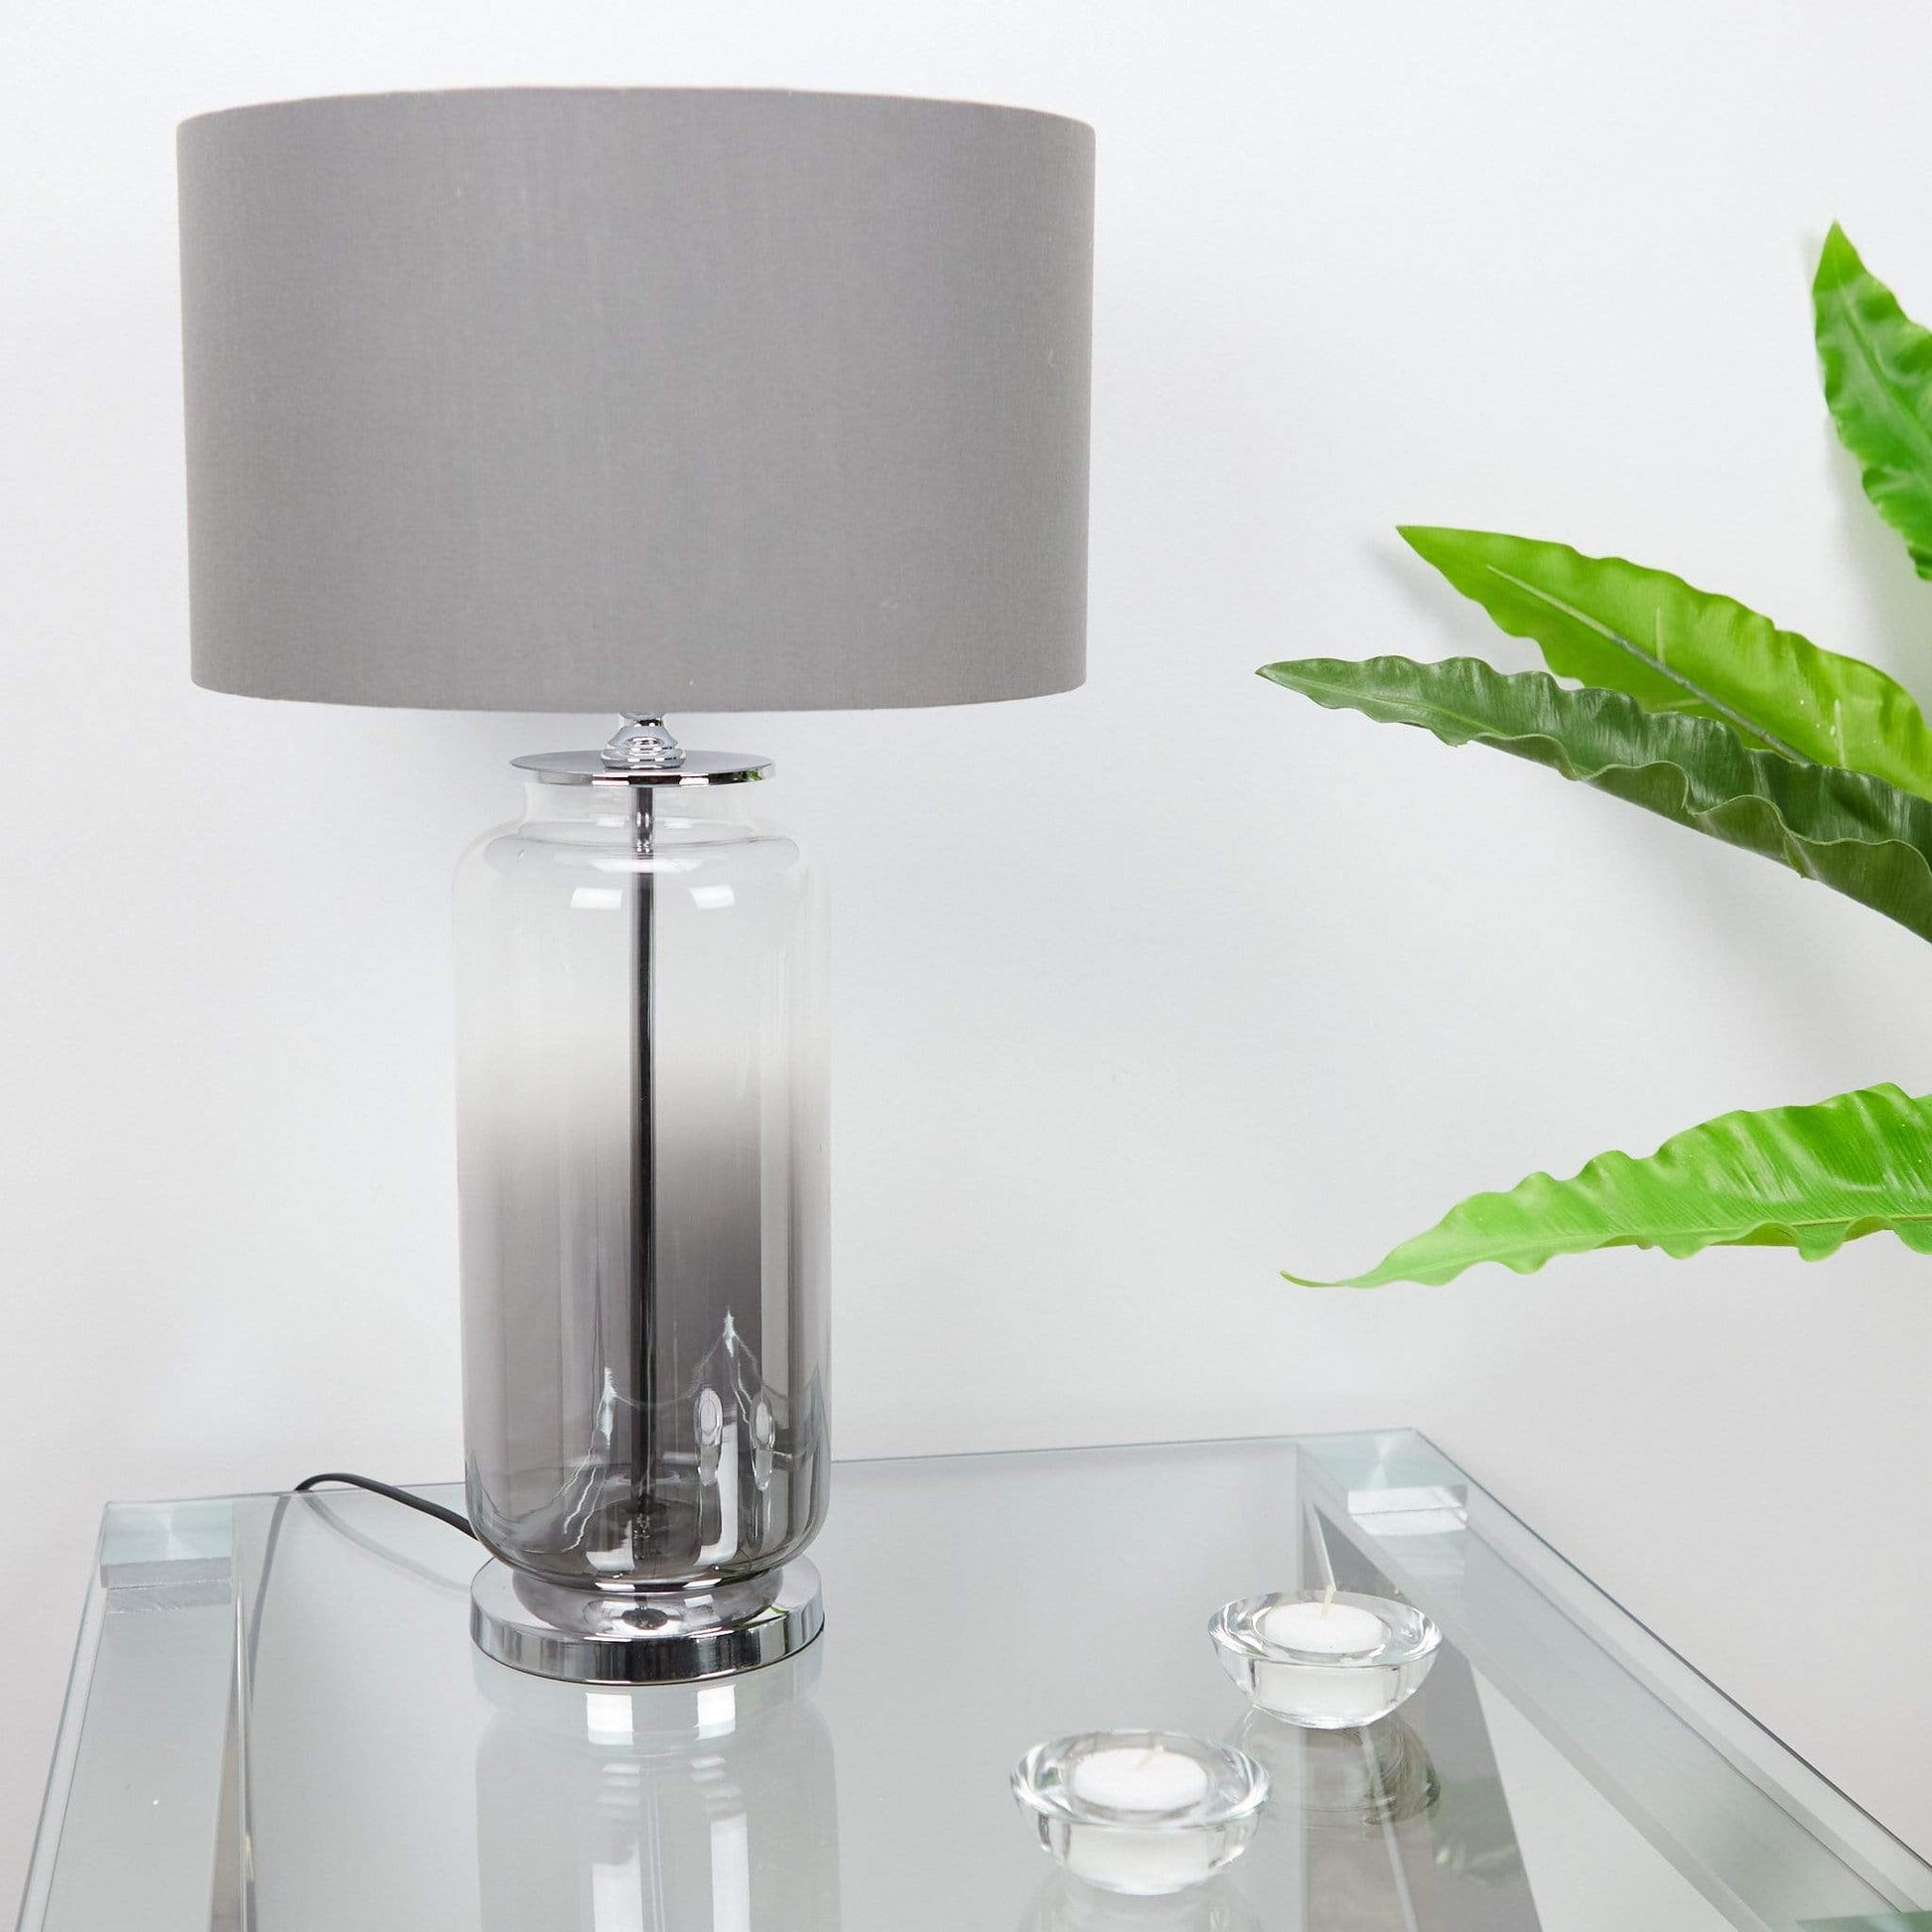 Lights  -  Pacific Lifestyle Grey Ombre Glass Table Lamp  -  50131967